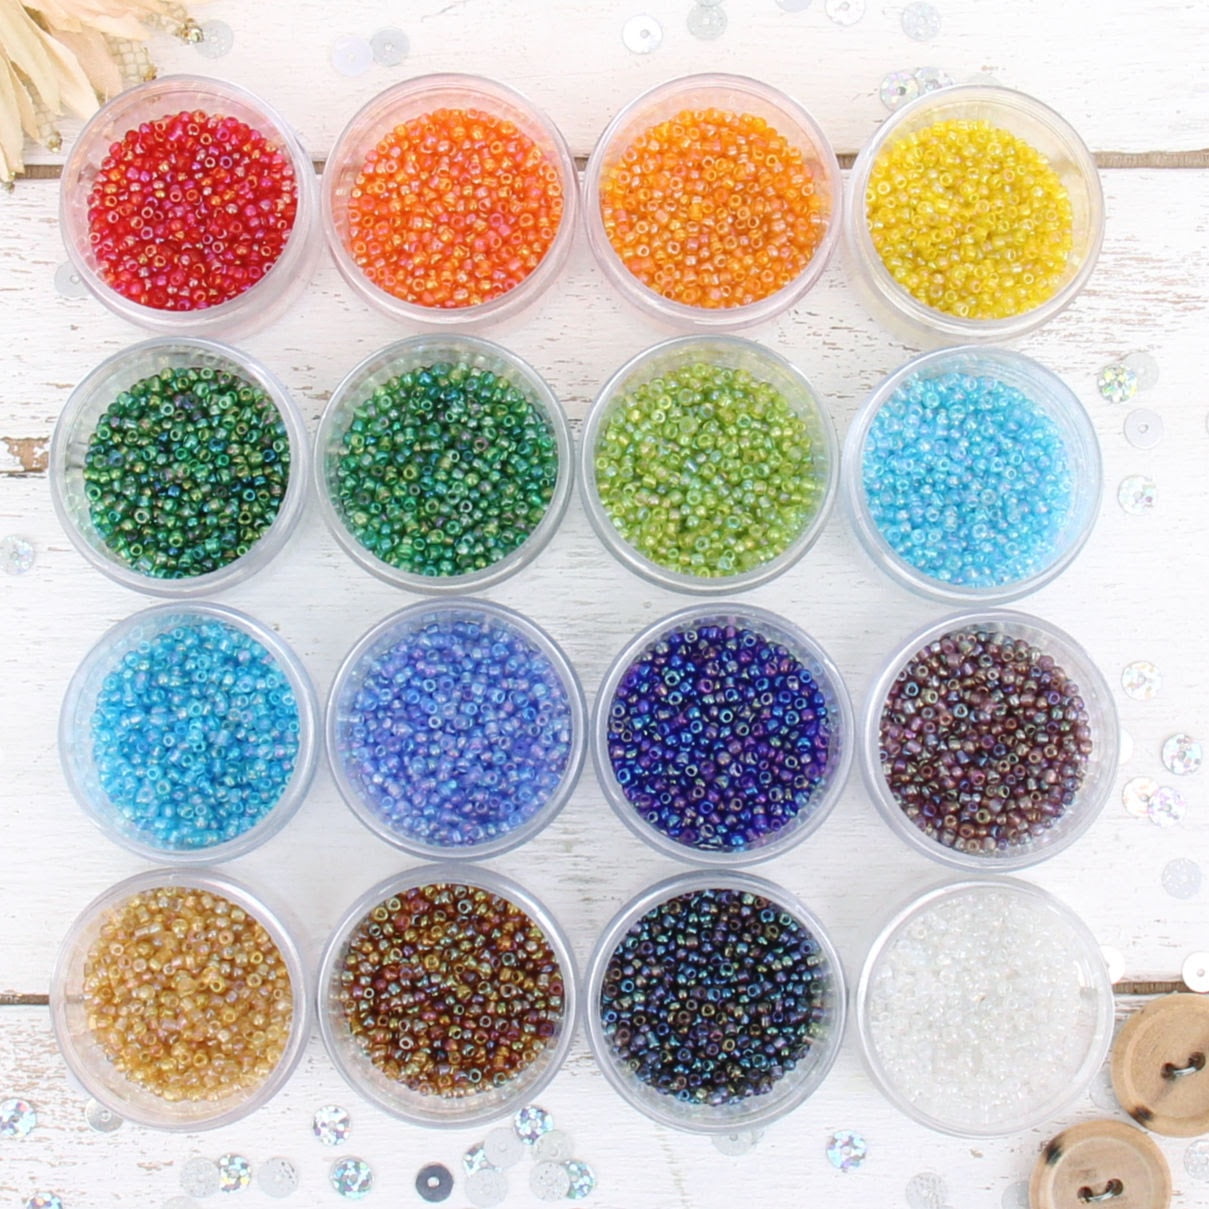 OUTUXED 7200pcs 4mm Glass Seed Beads for Friendship Algeria